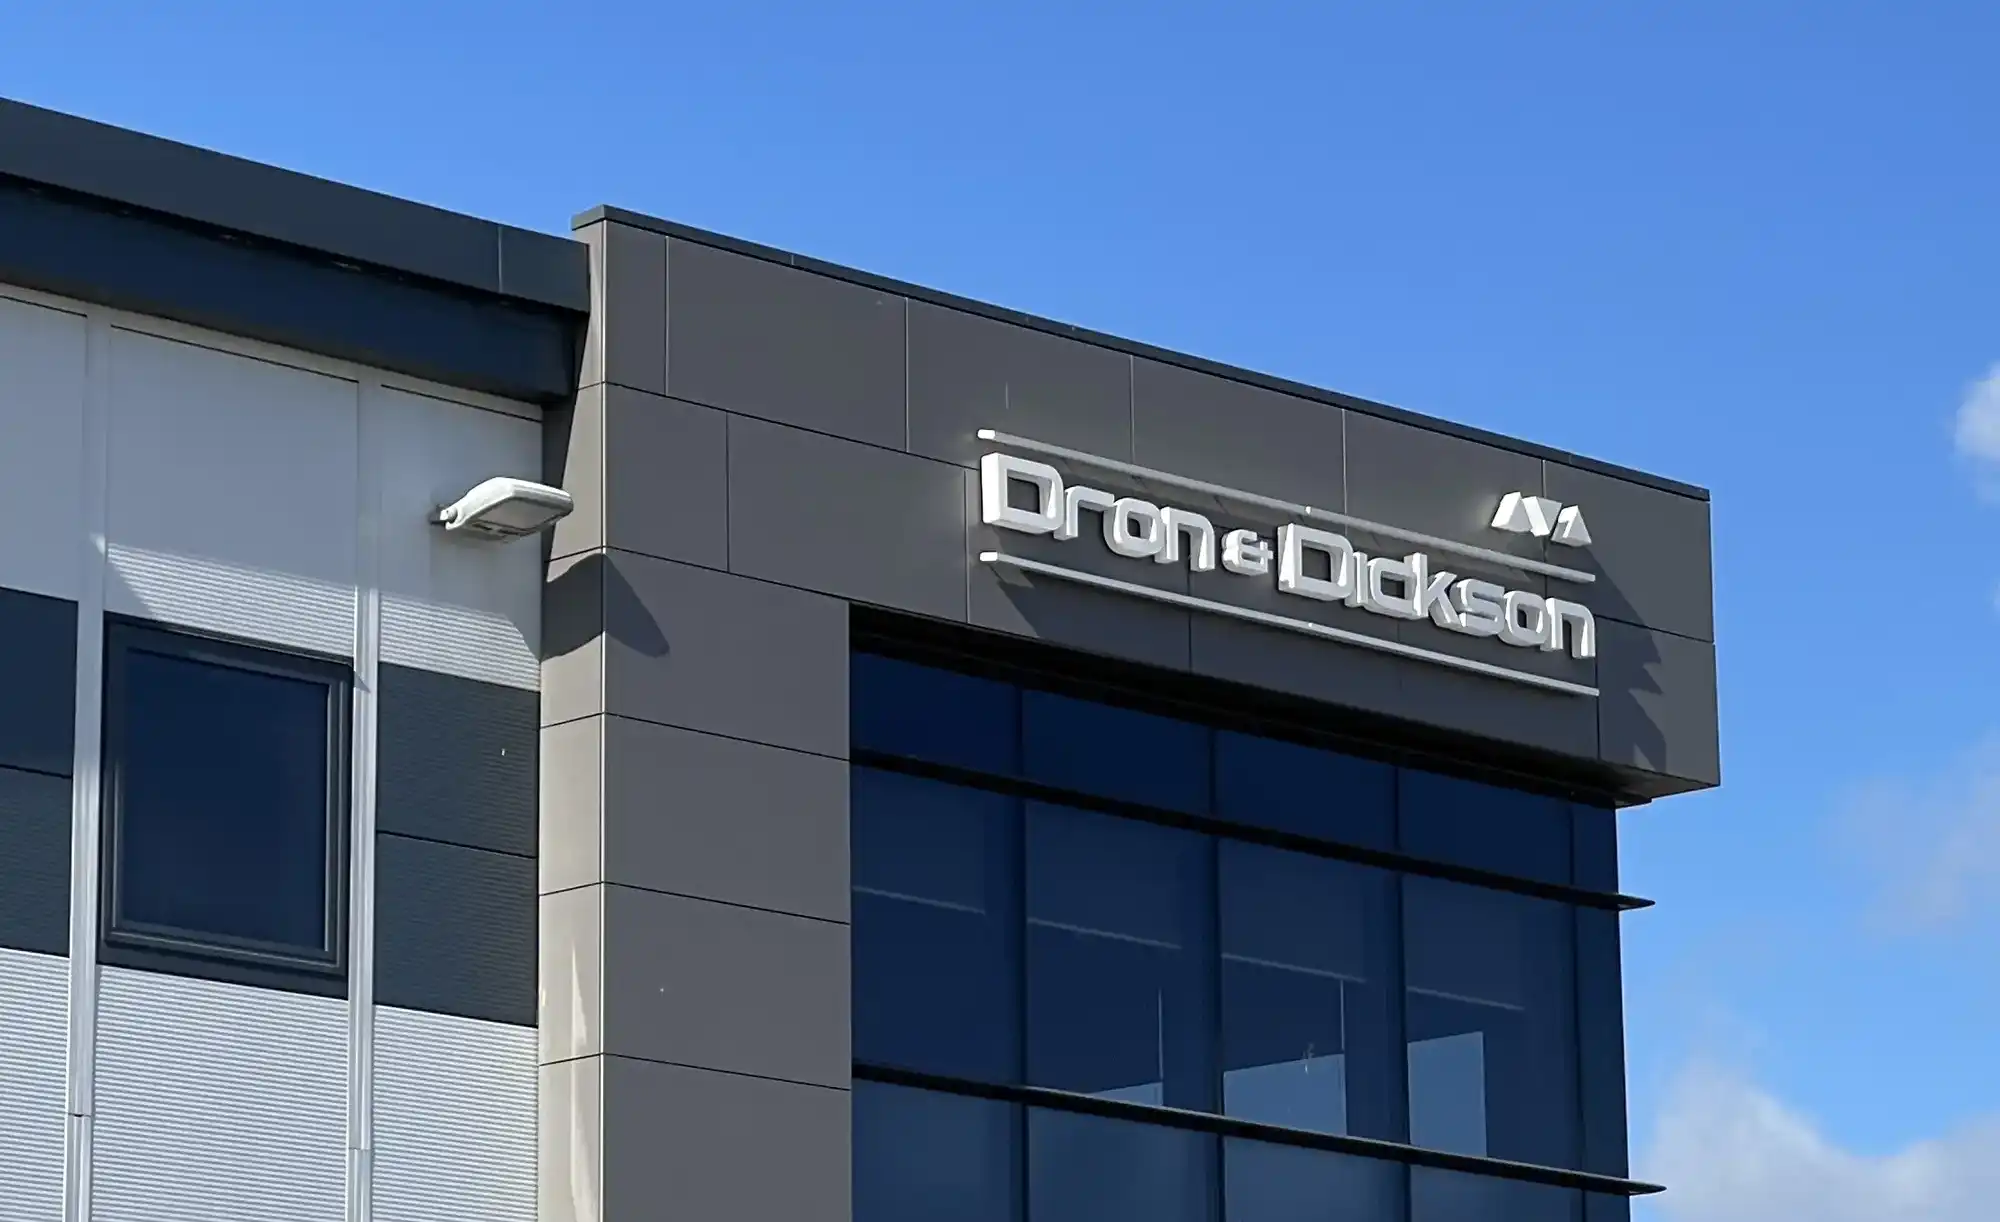 dron and dickson logo on office building